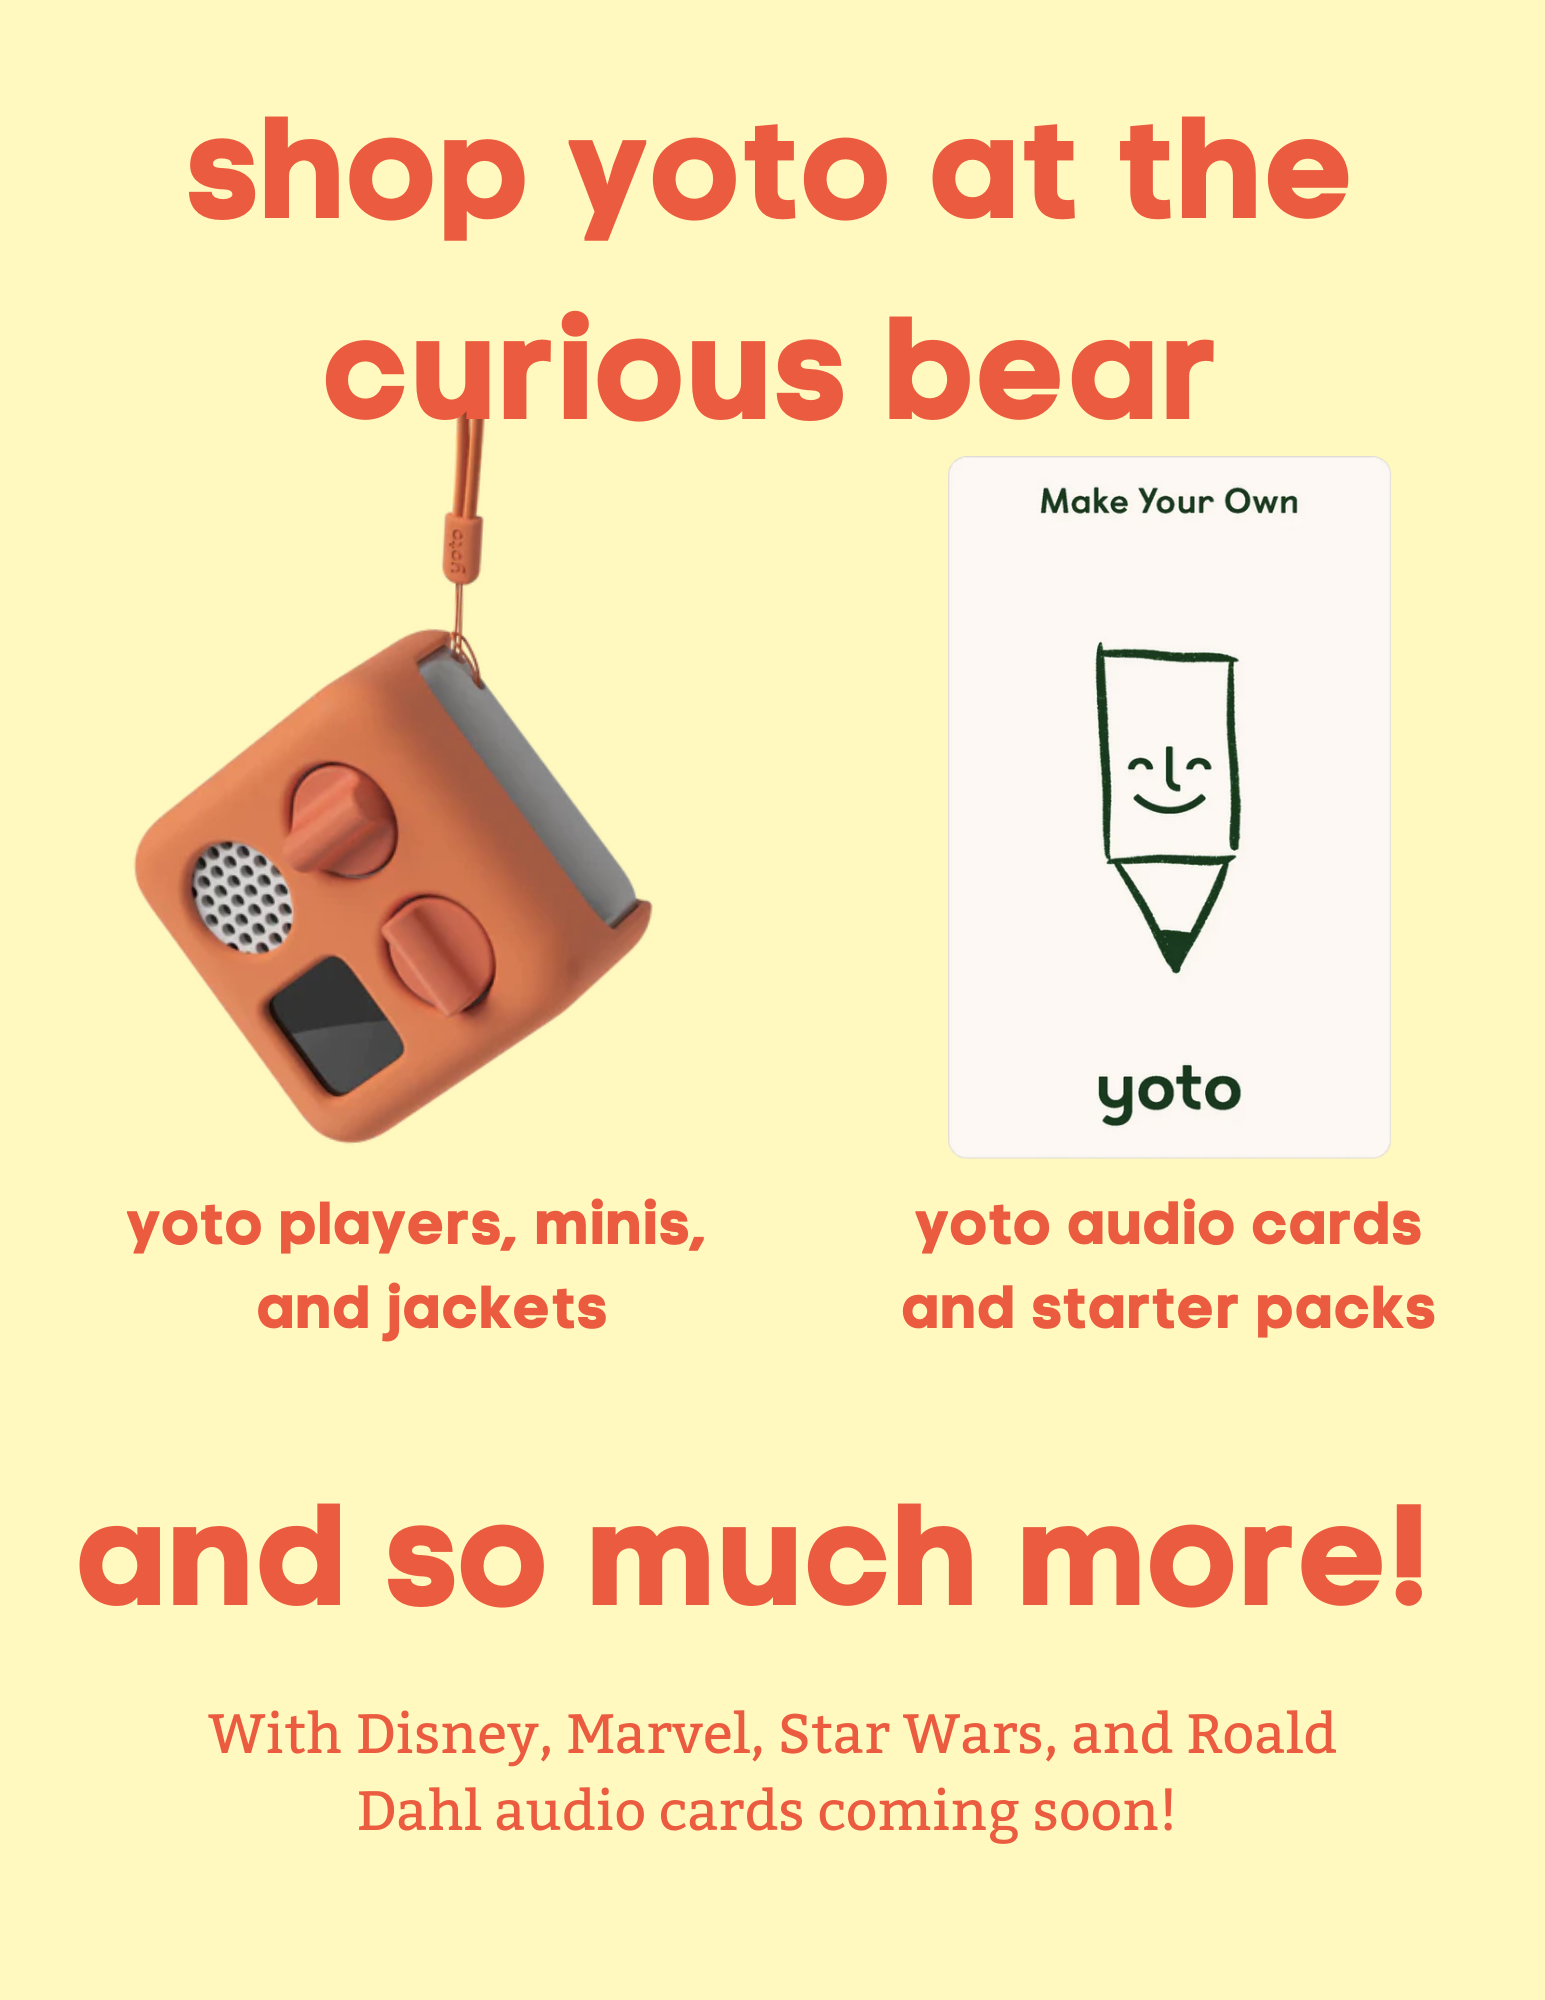 "Shop Yoto at the Curious Bear." At the Curious Bear Toy Store you can purchase Yoto players, minis. and  jackets. Audio cards and starter packs are also available for purchase. 